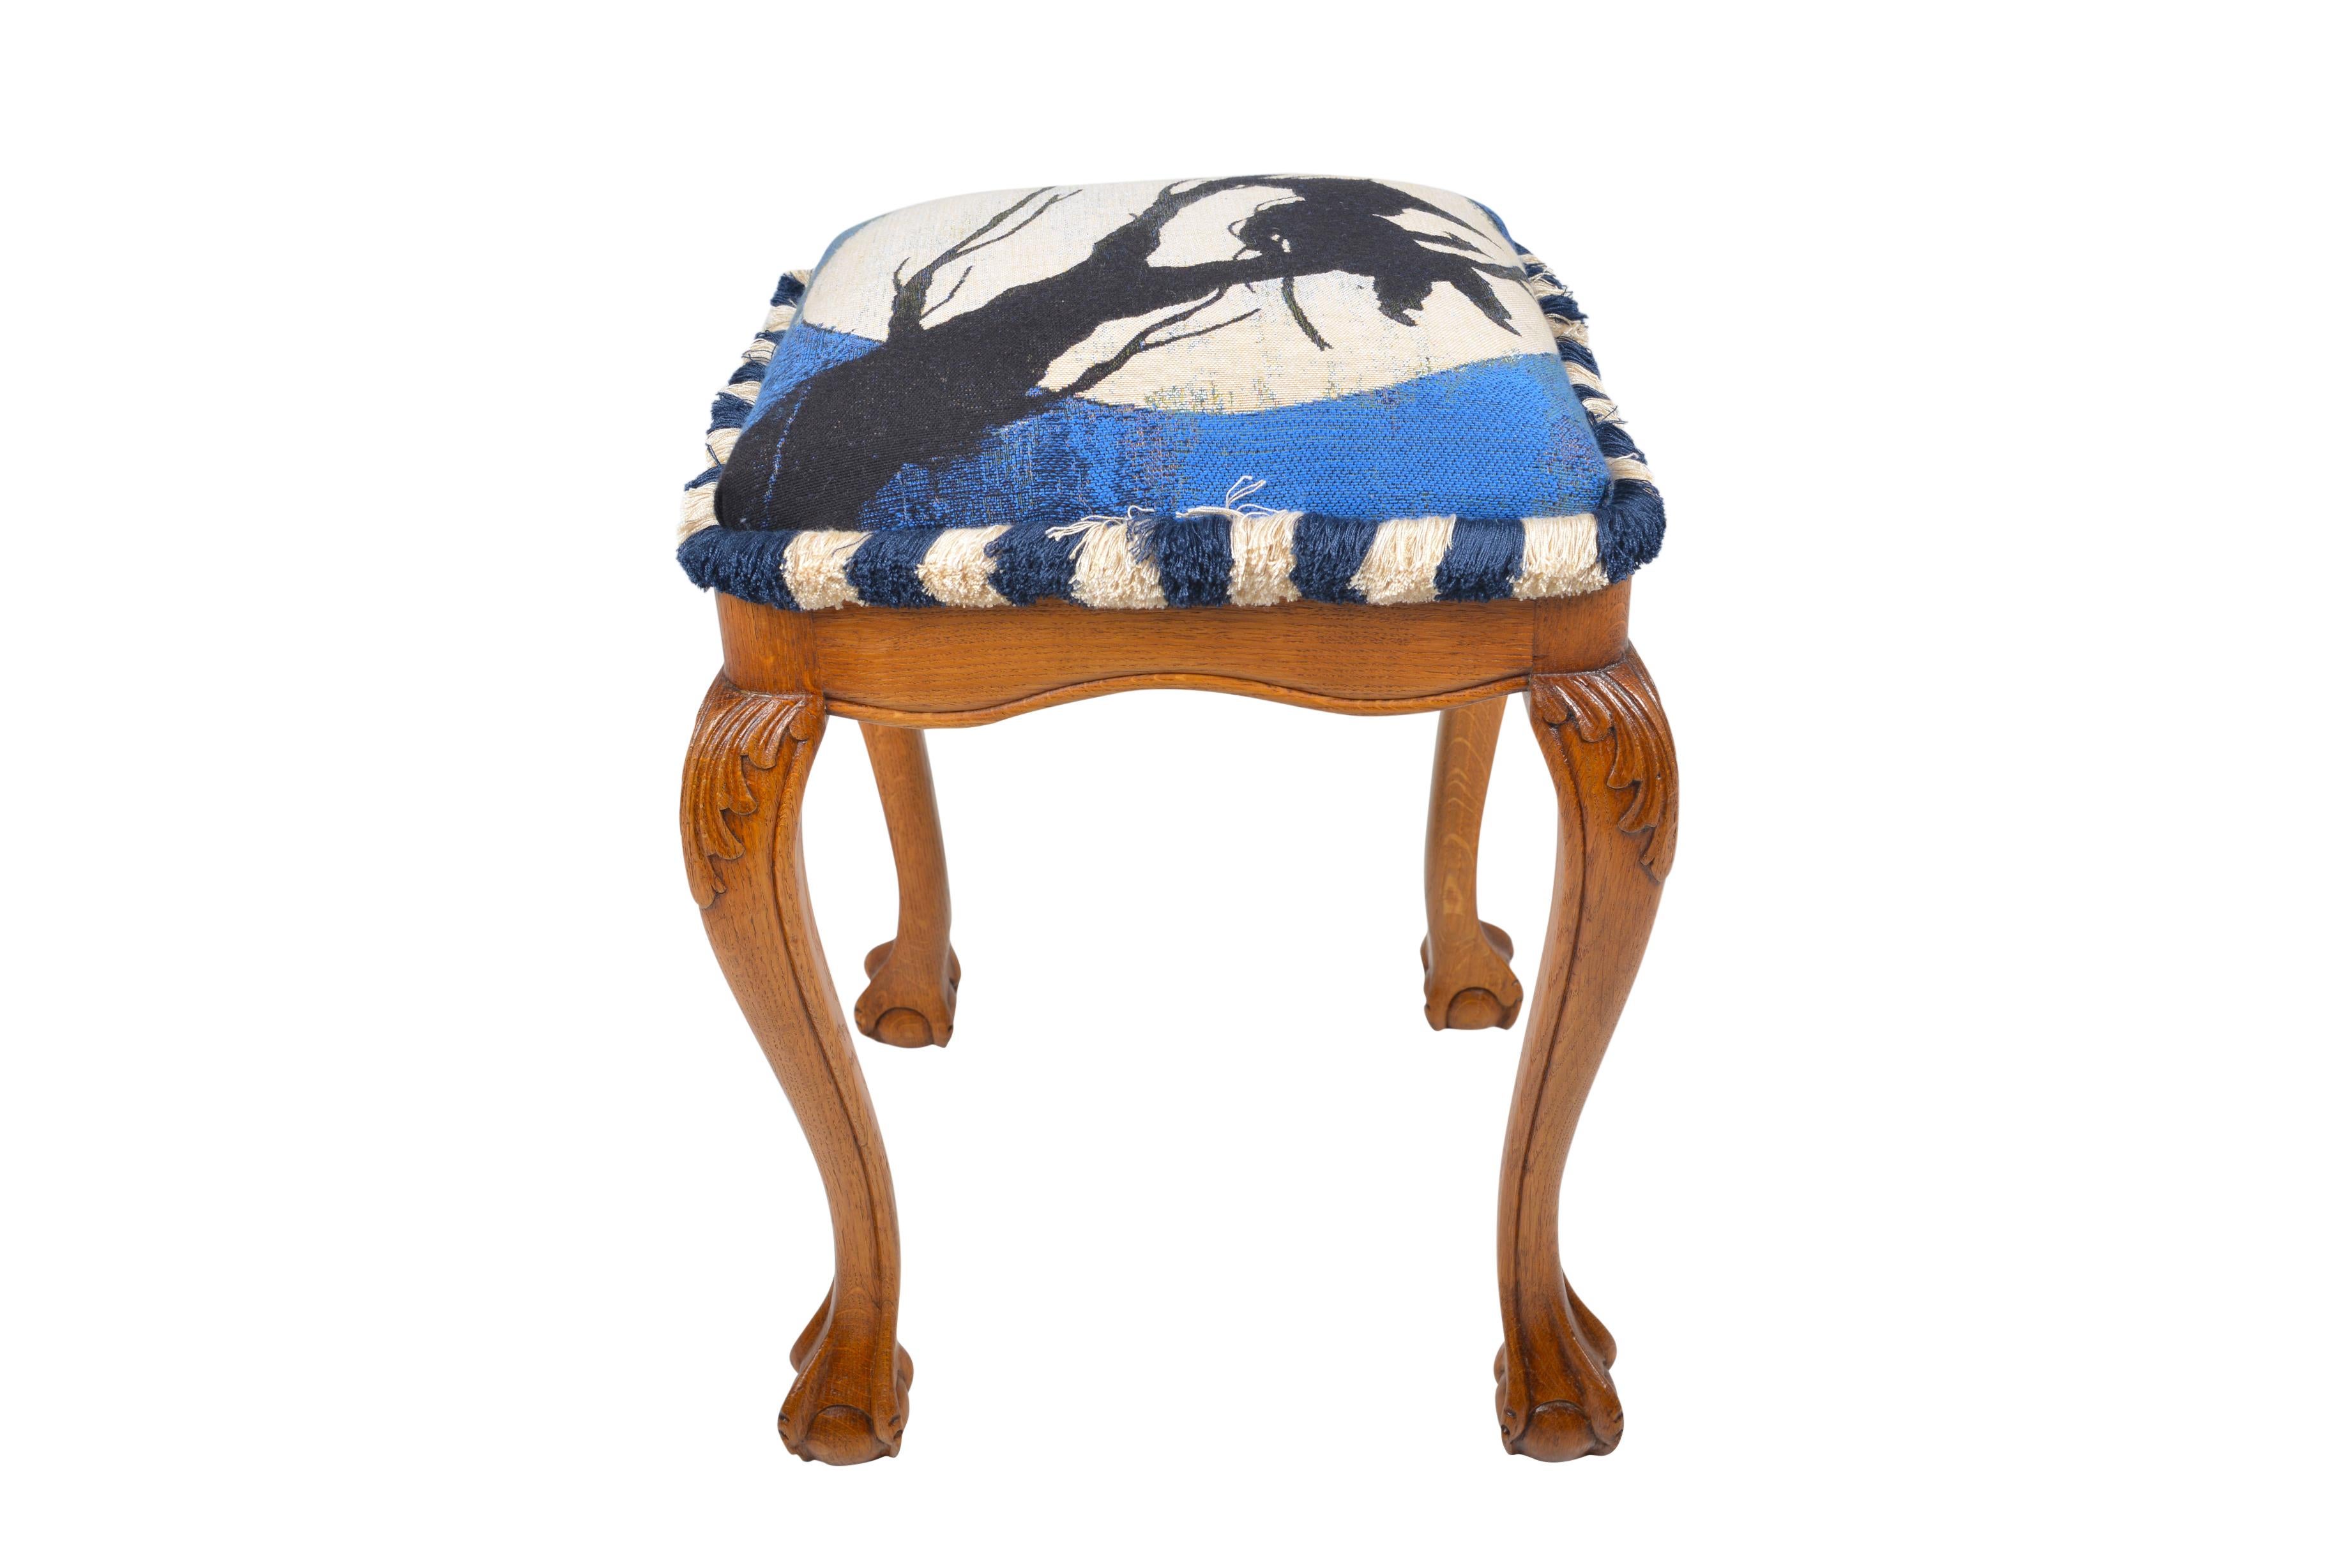 Belgian oak stool in the Louis XV revival style with claw and ball feet, reupholstered in the JPDEMEYER & co style.